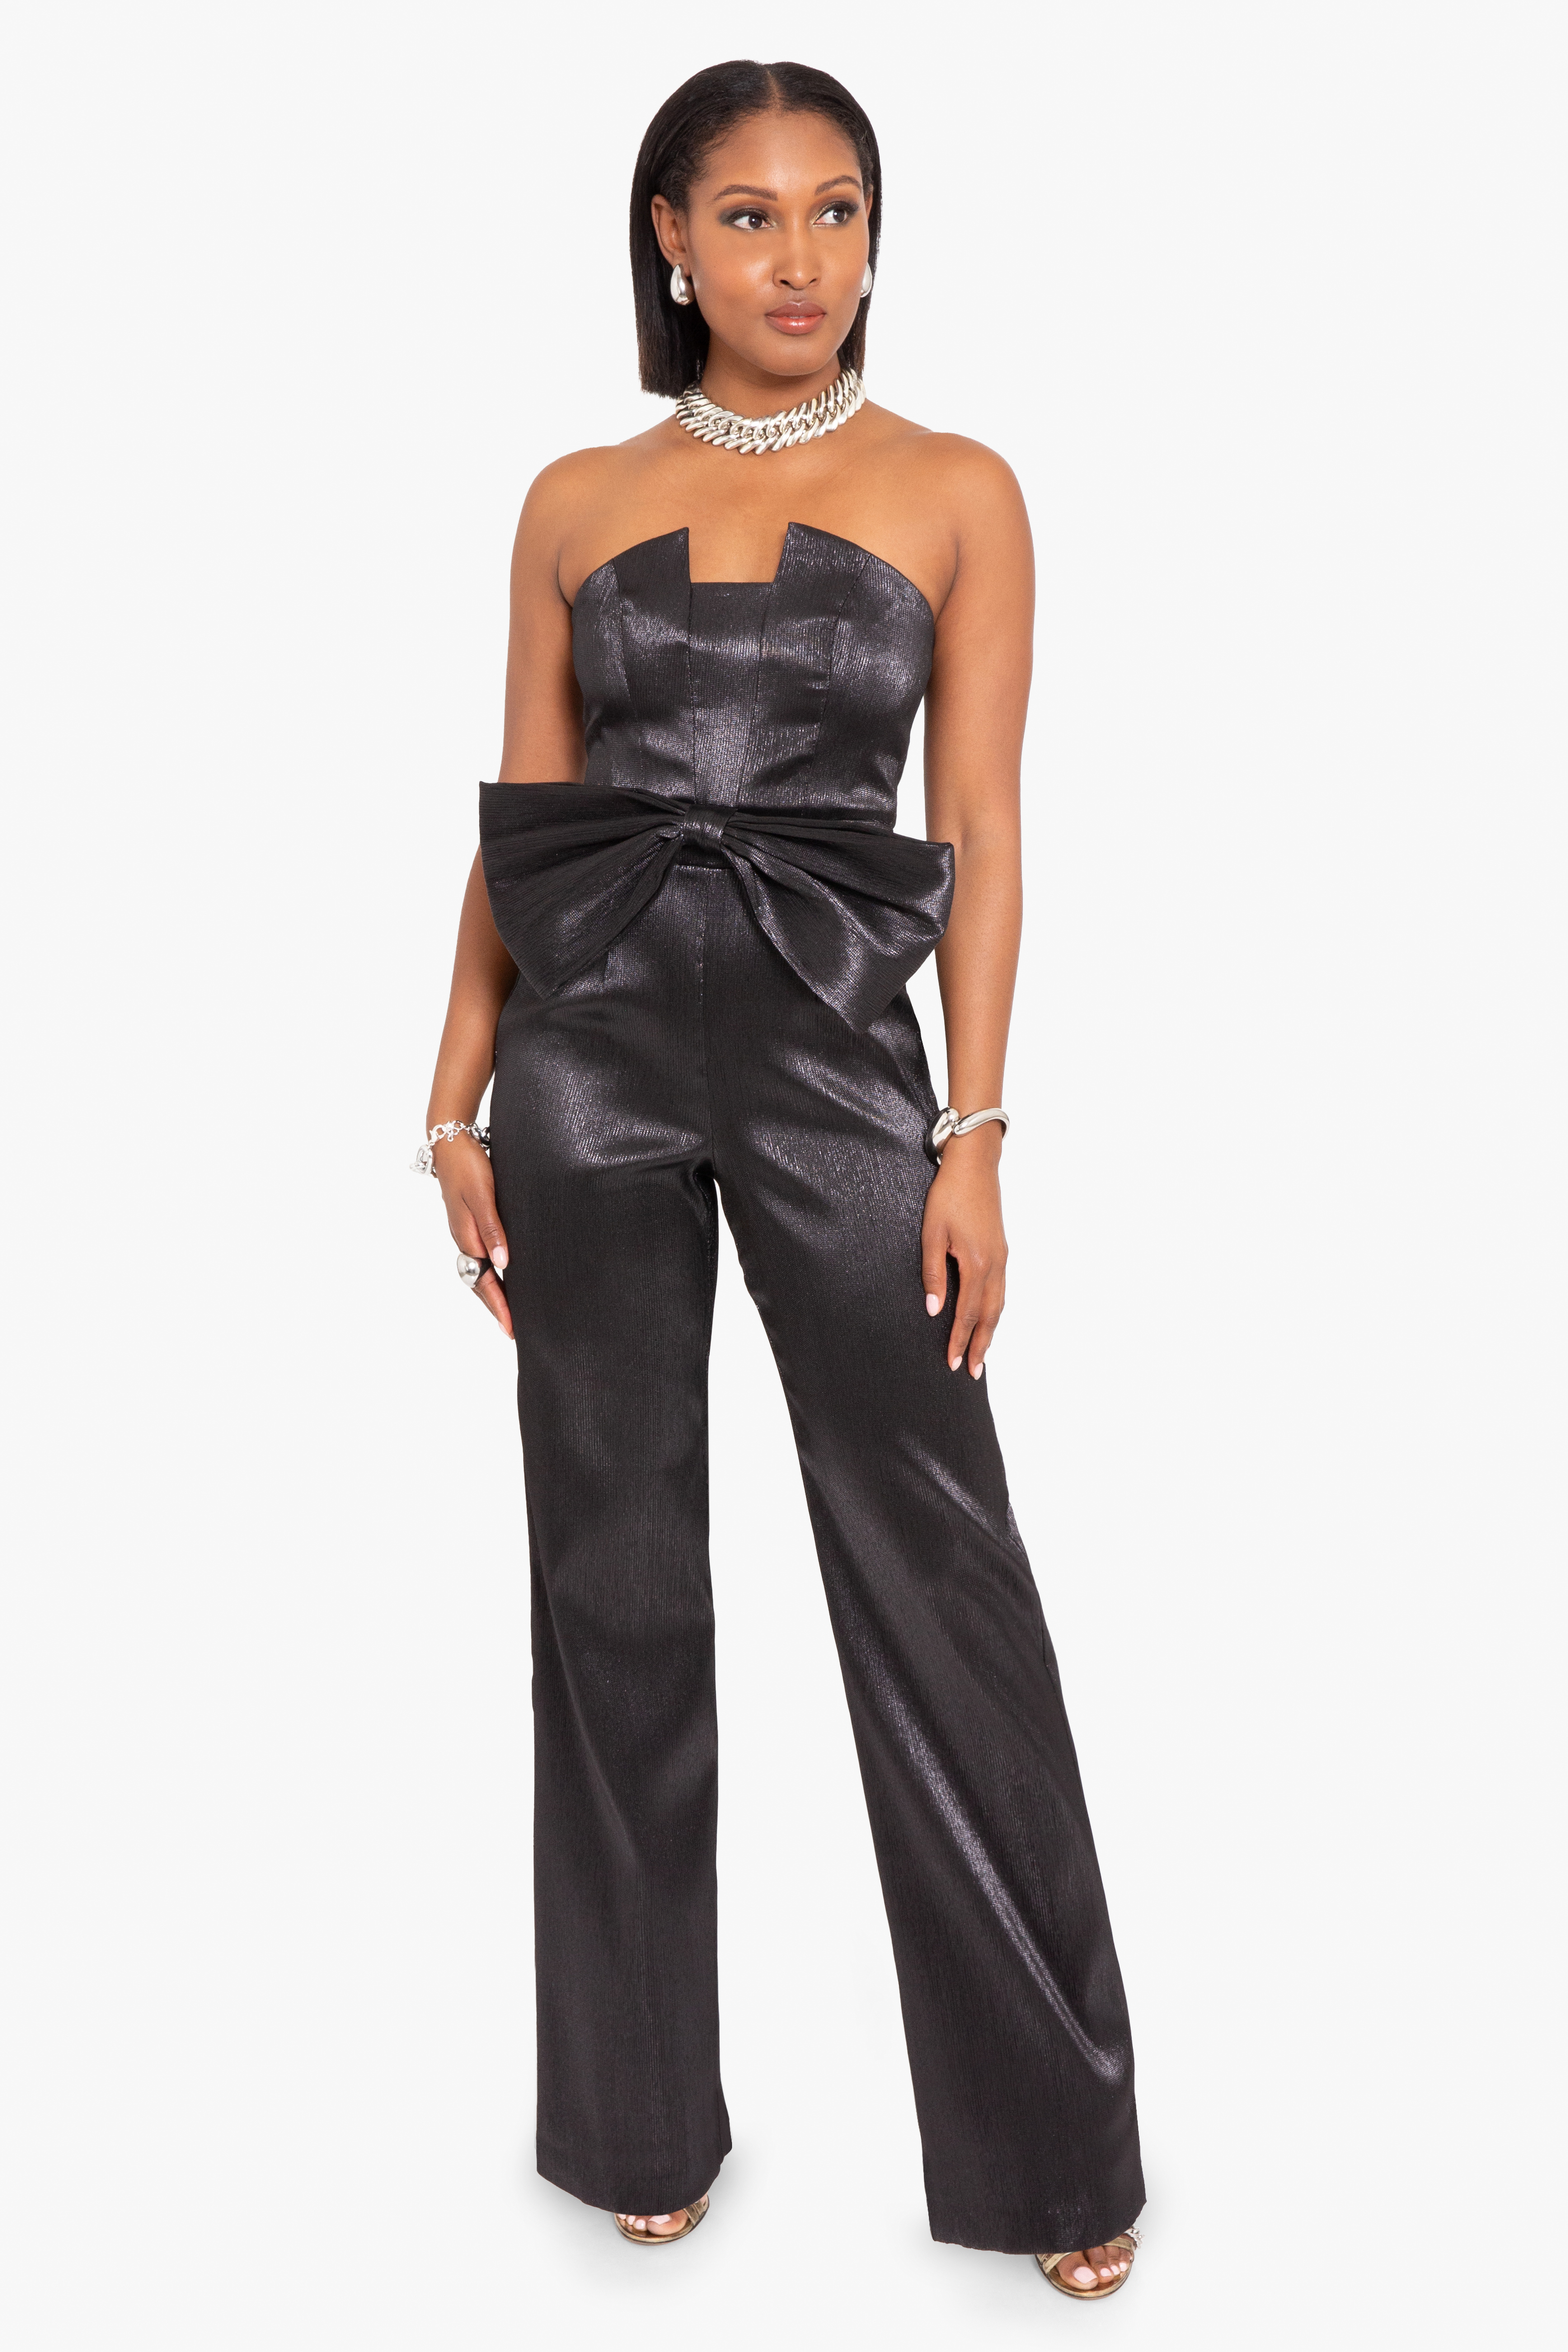 Black Halo Strapless Jumpsuit - Black, 12.75 Rise Jumpsuits and Rompers,  Clothing - WBH31428